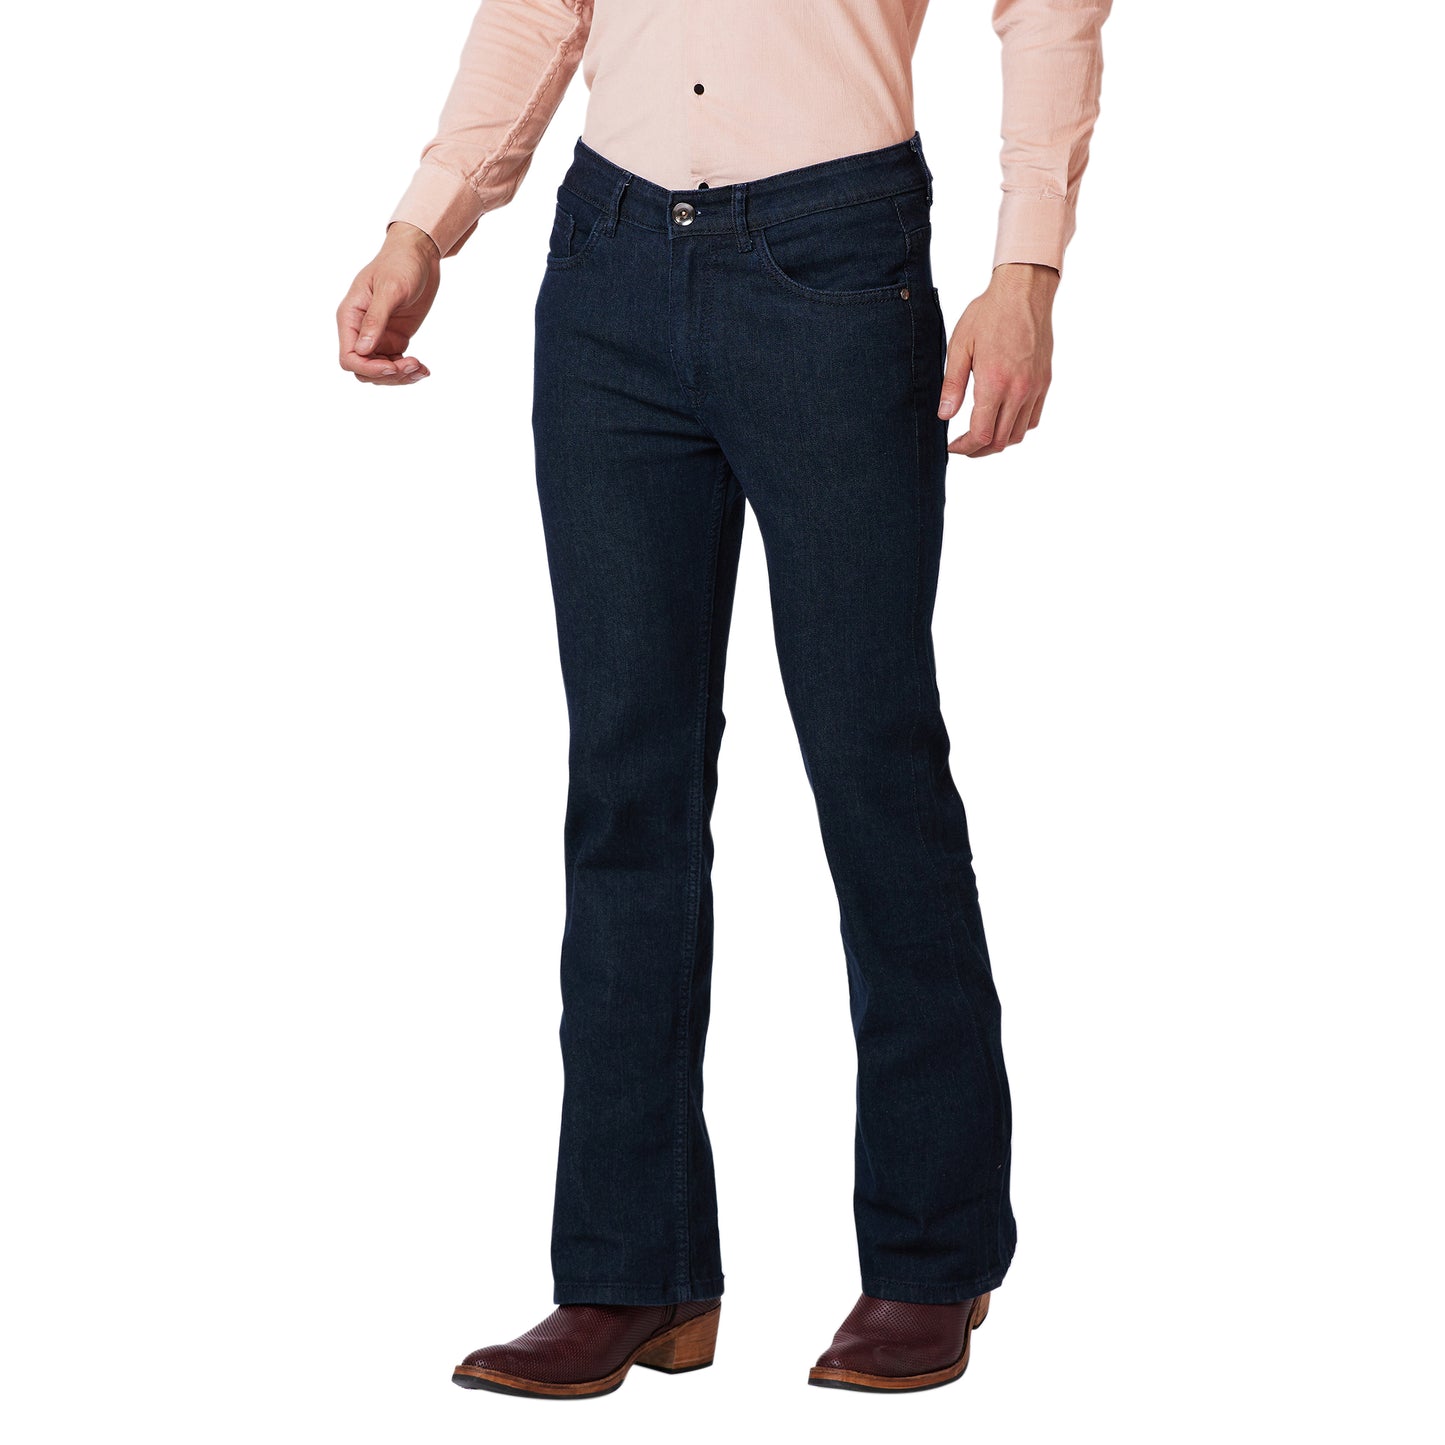 Solid Stretchable Bootcut Denim Jeans For Men